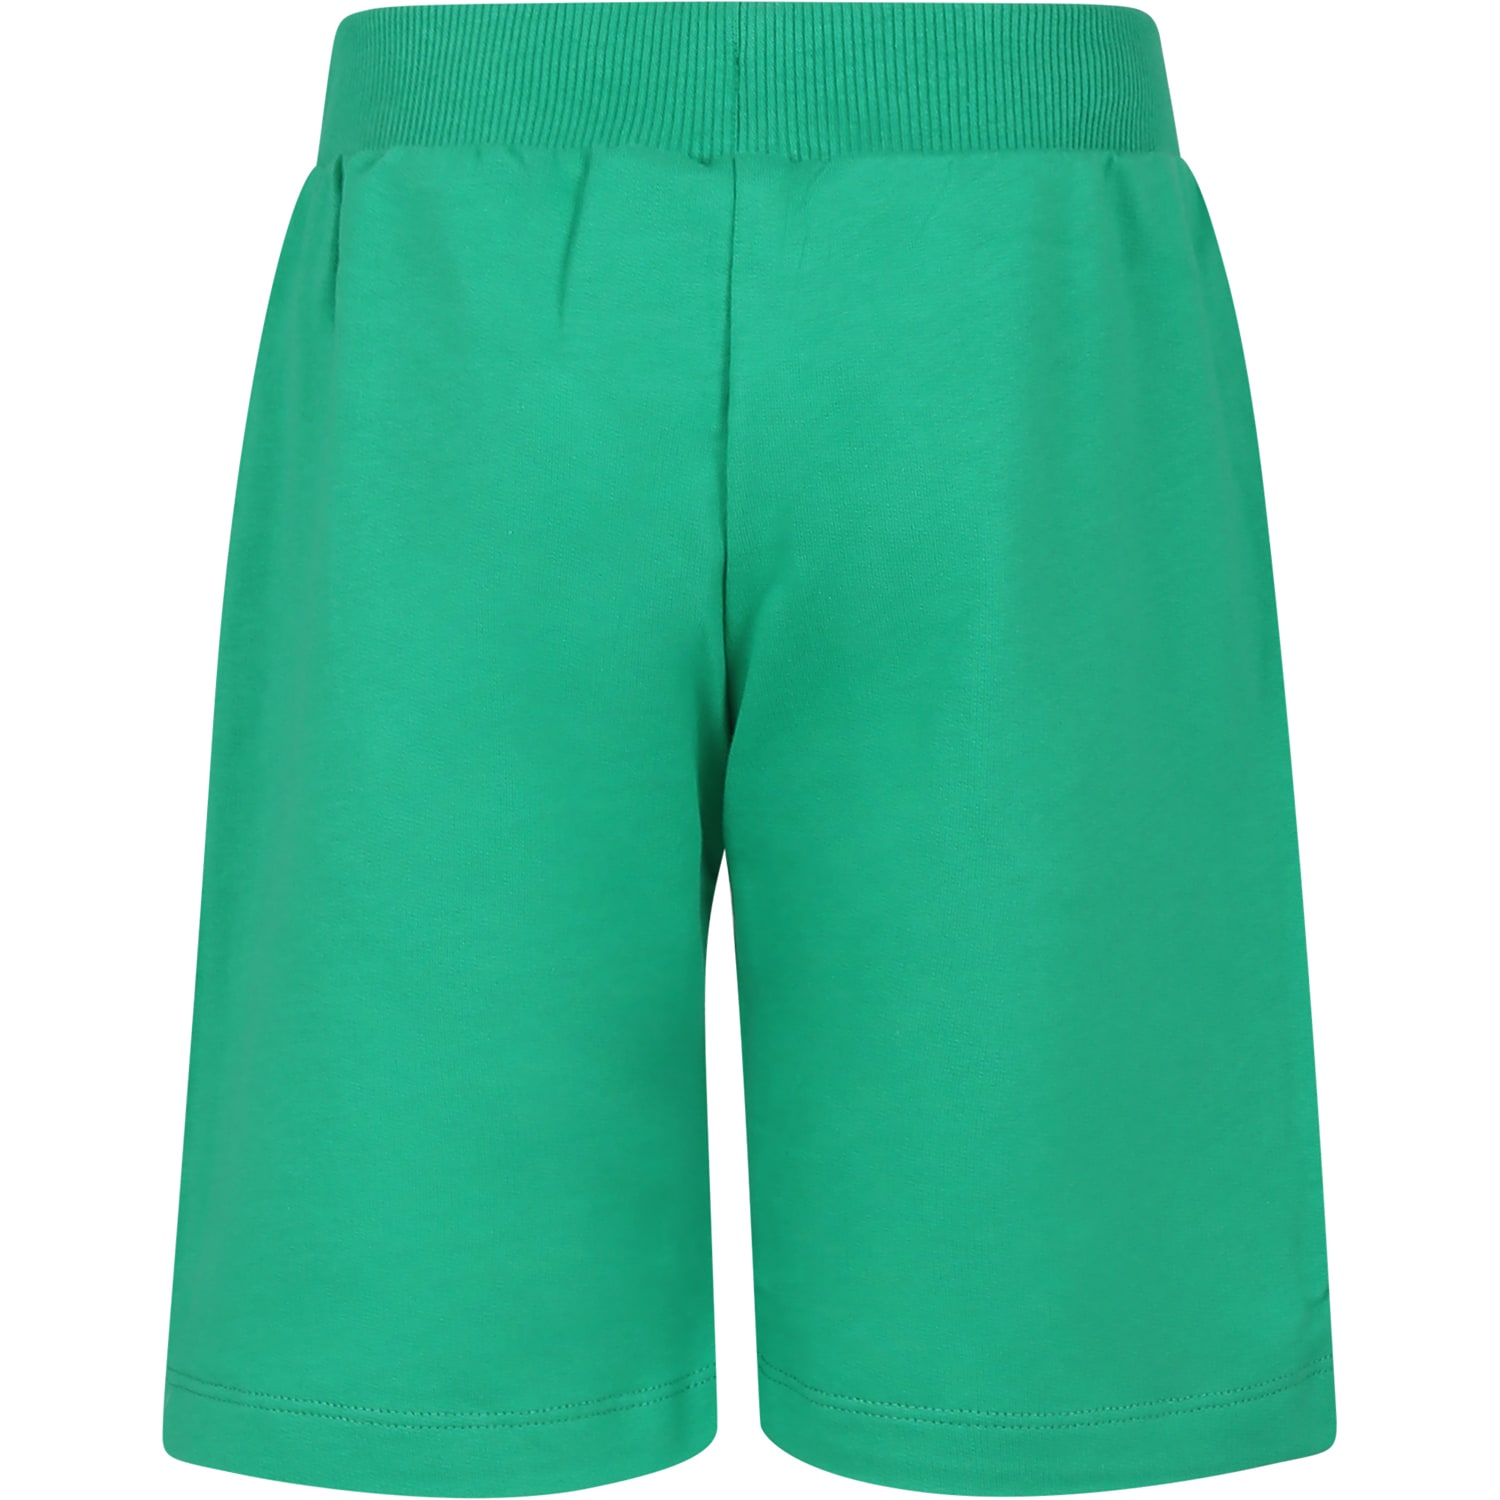 Shop Moschino Green Shorts For Kids With Teddy Bears And Logo